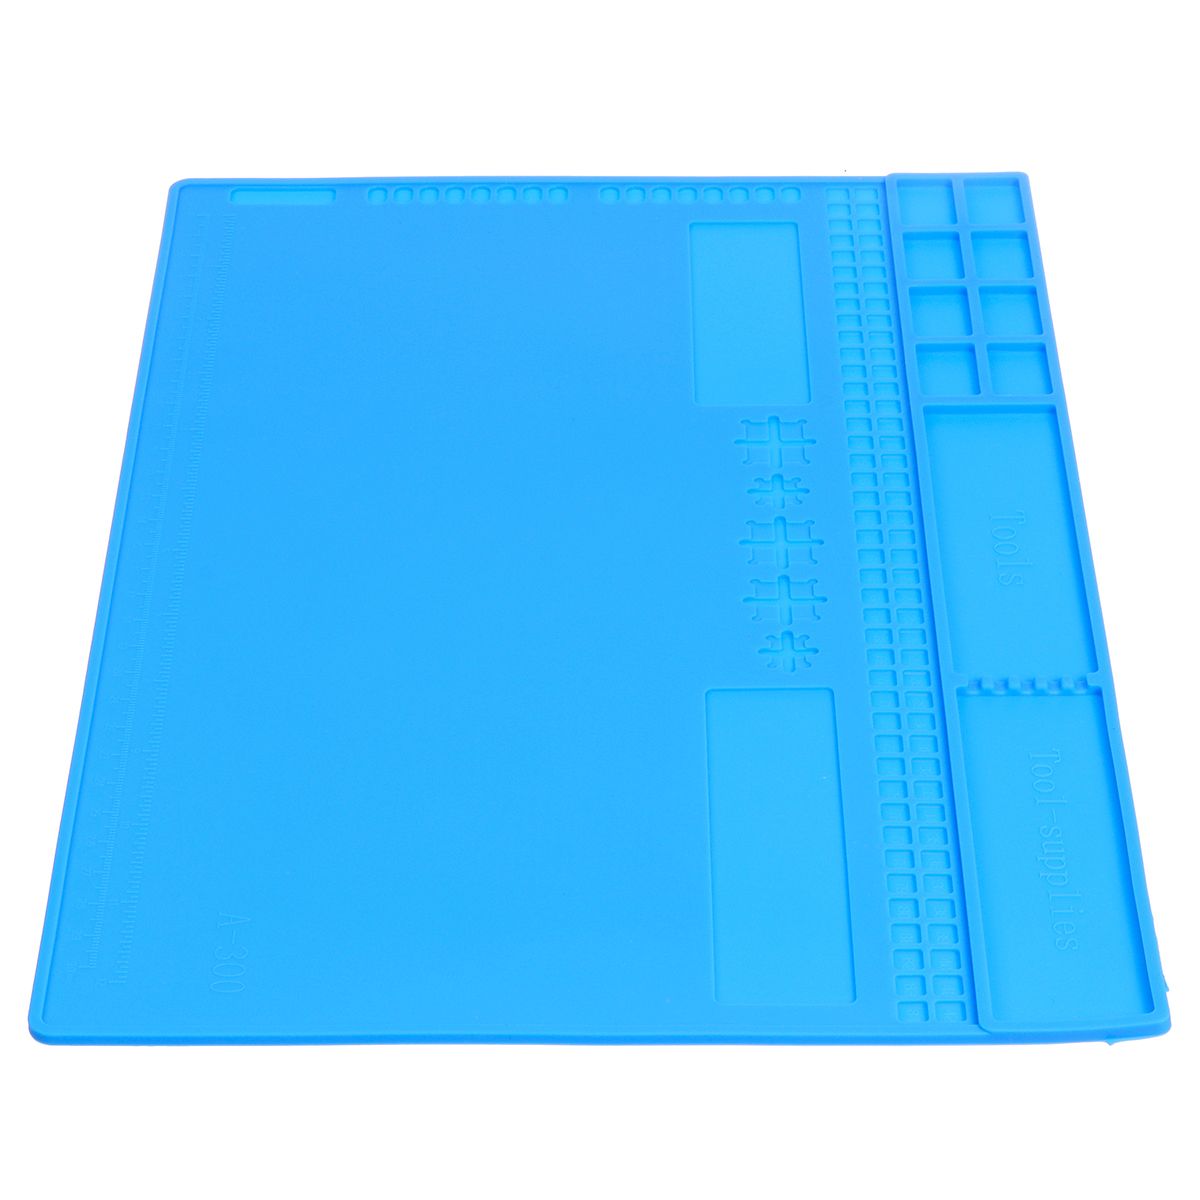 Phone-Maintenance-Insulation-Pad-Silicone-Pad-with-CPU-Card-Slot-High-1745710